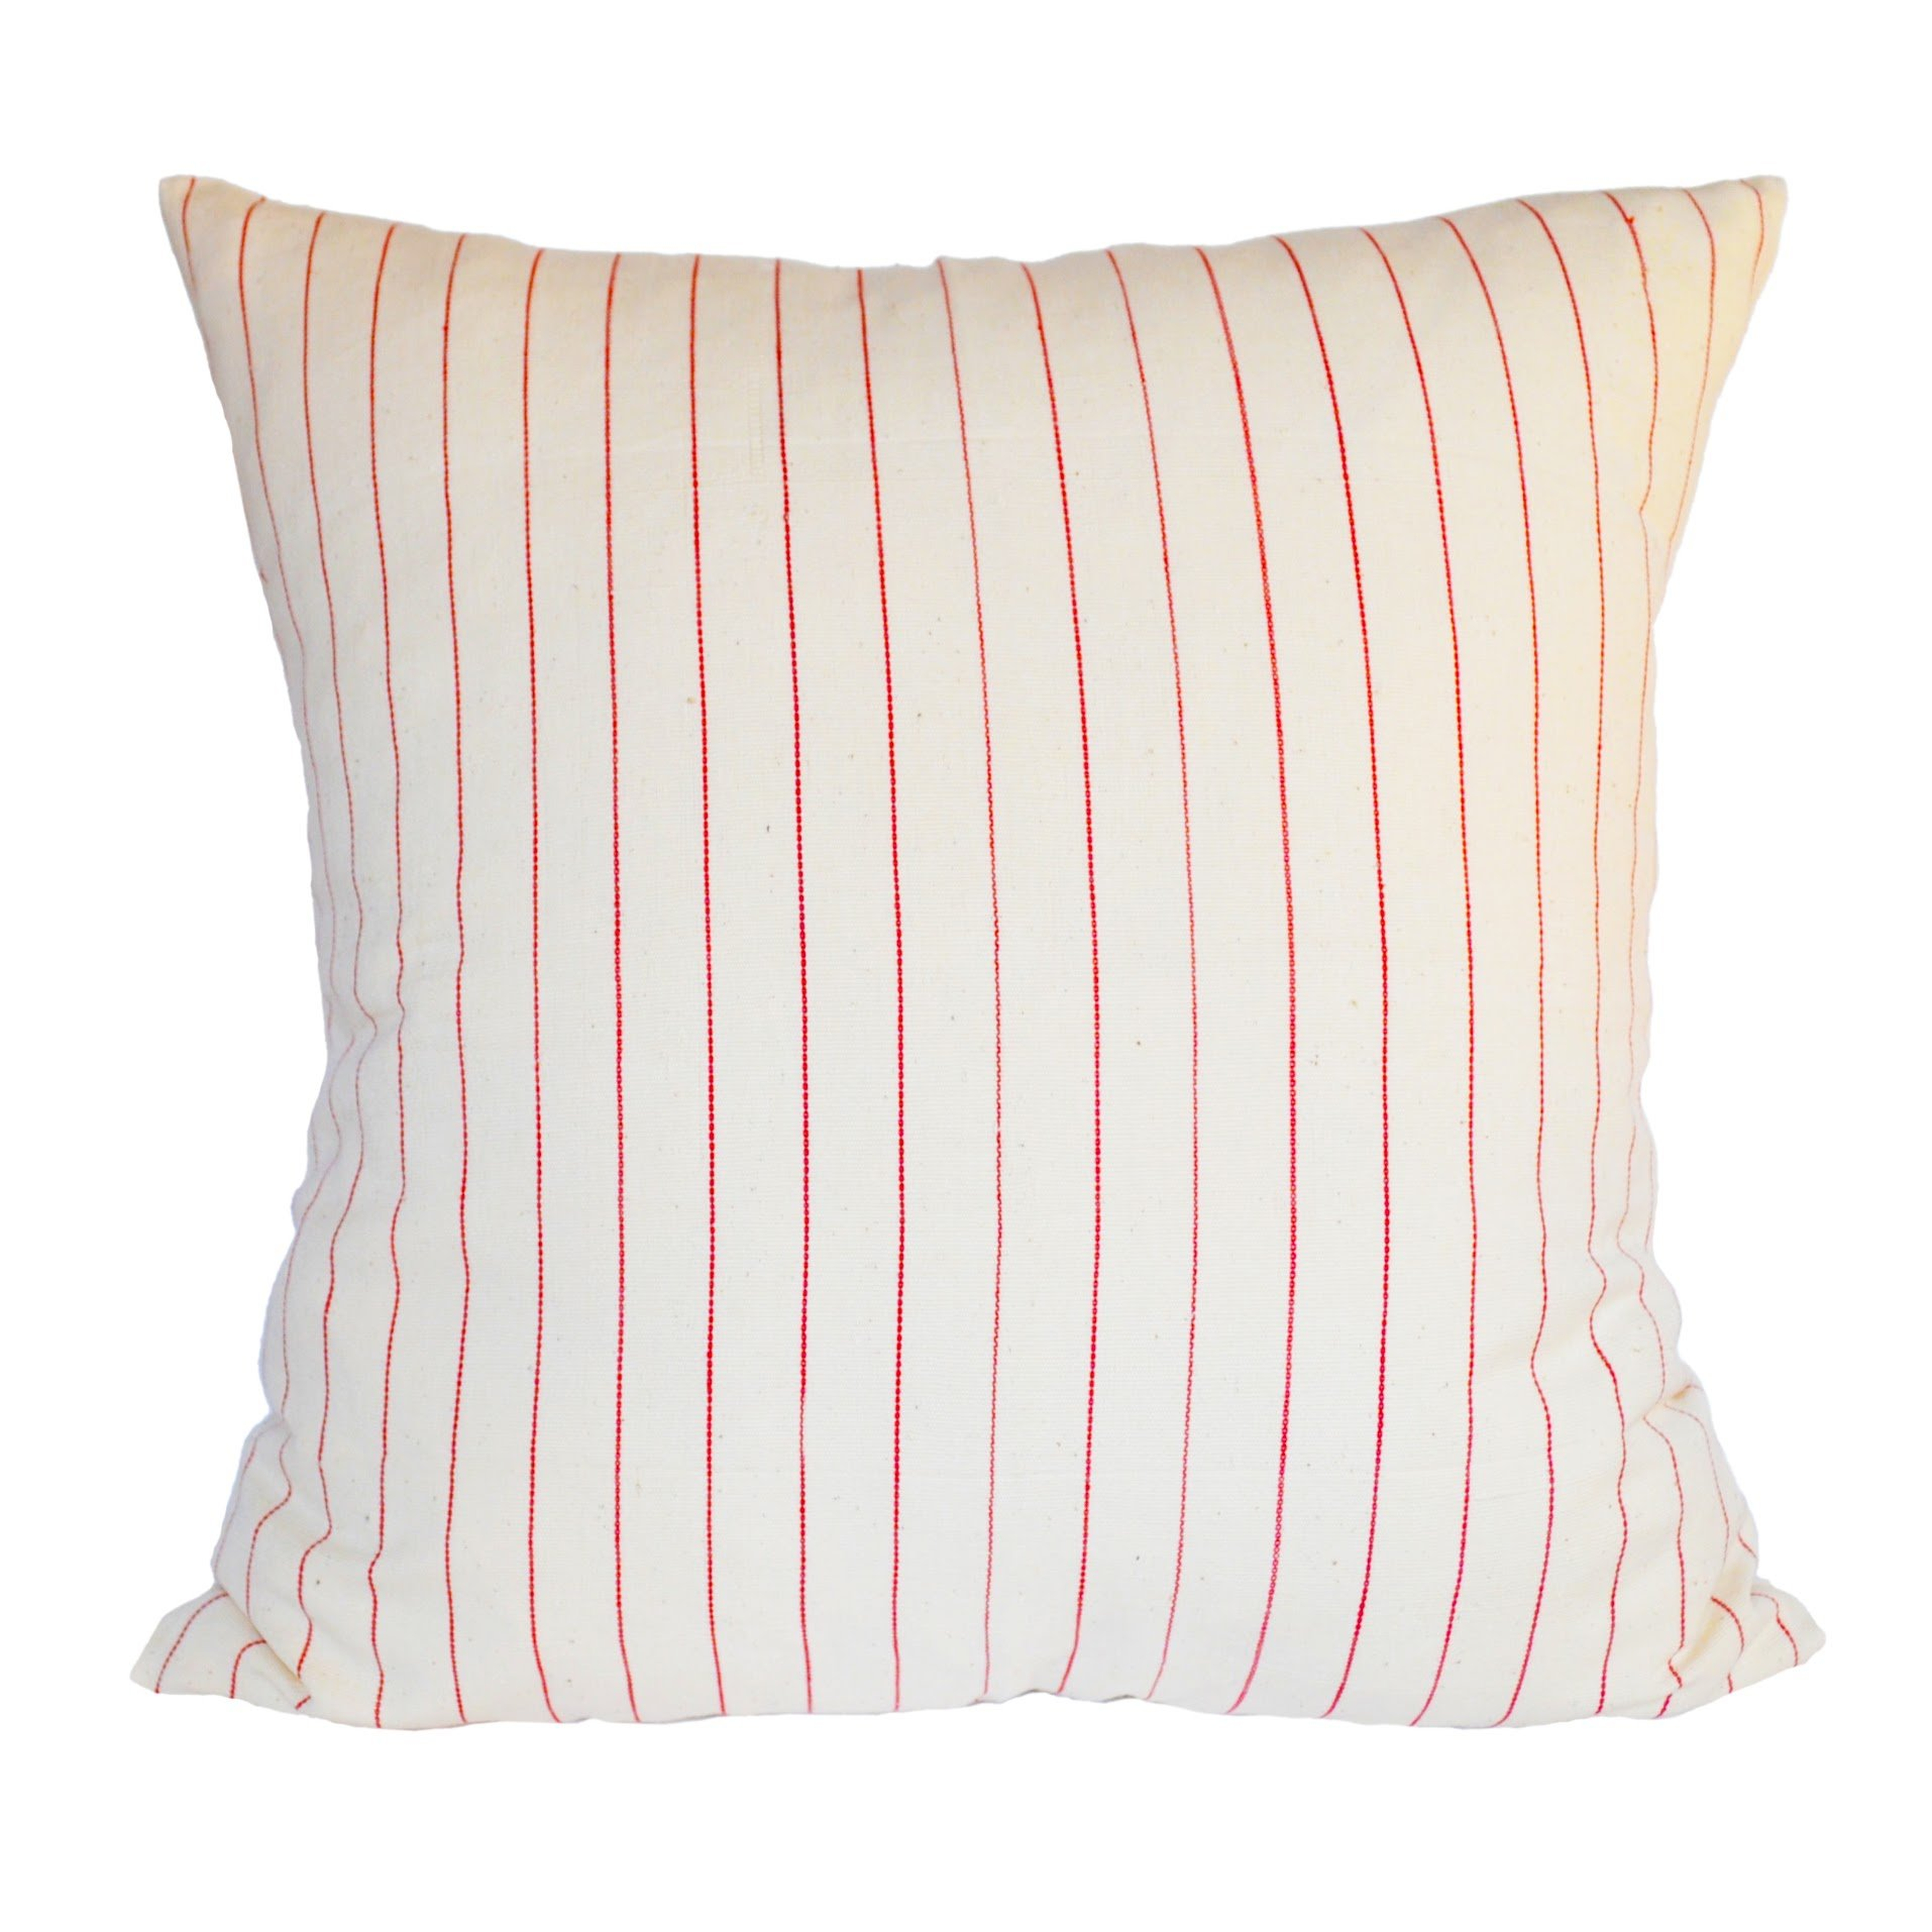 cream with red stripe pillow - PillowPia